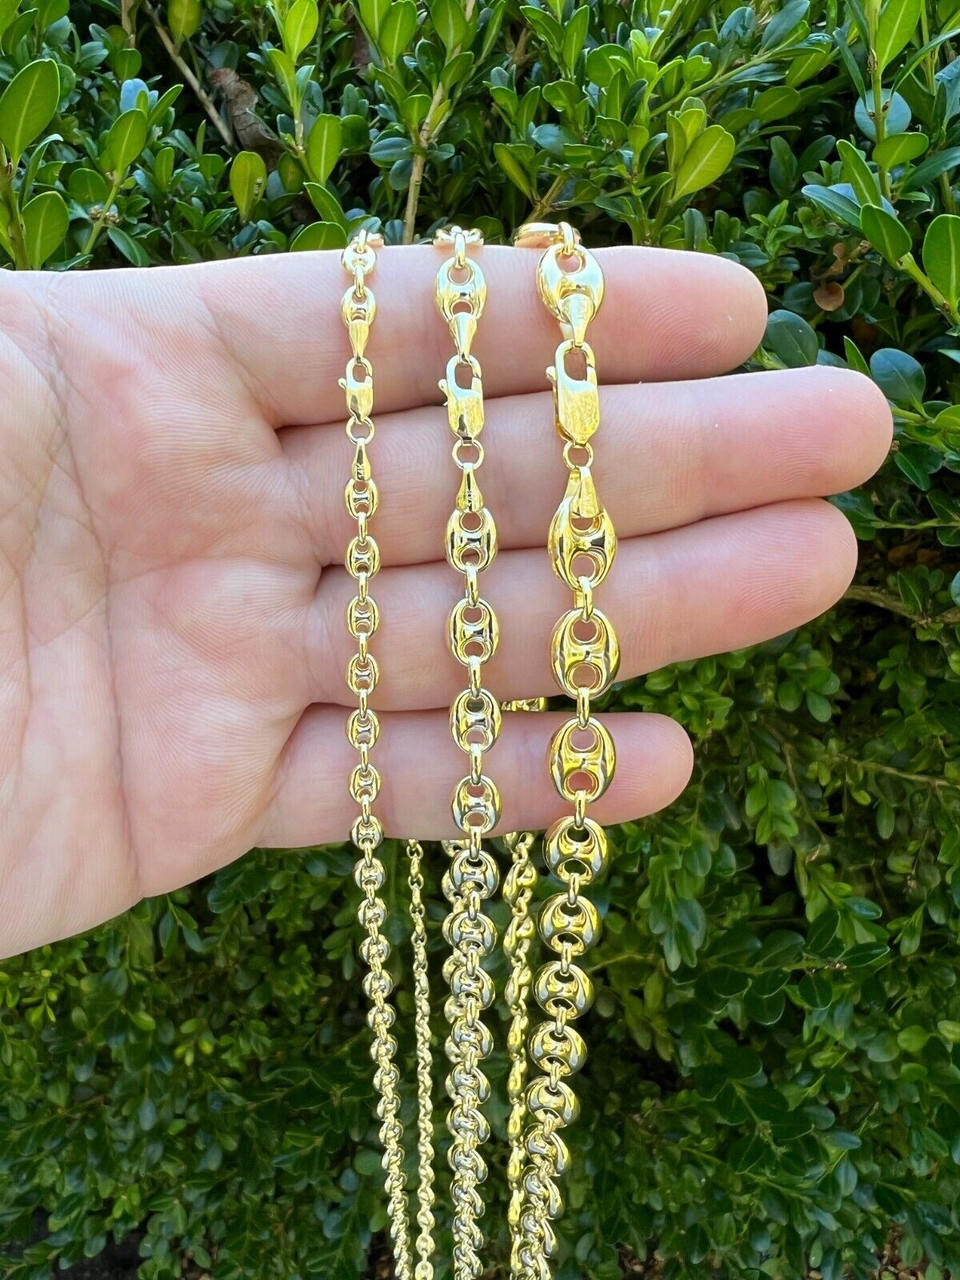 14k HOLLOW Real Yellow Gold Puffed Mariner Gucci Link Chain 5-9mm